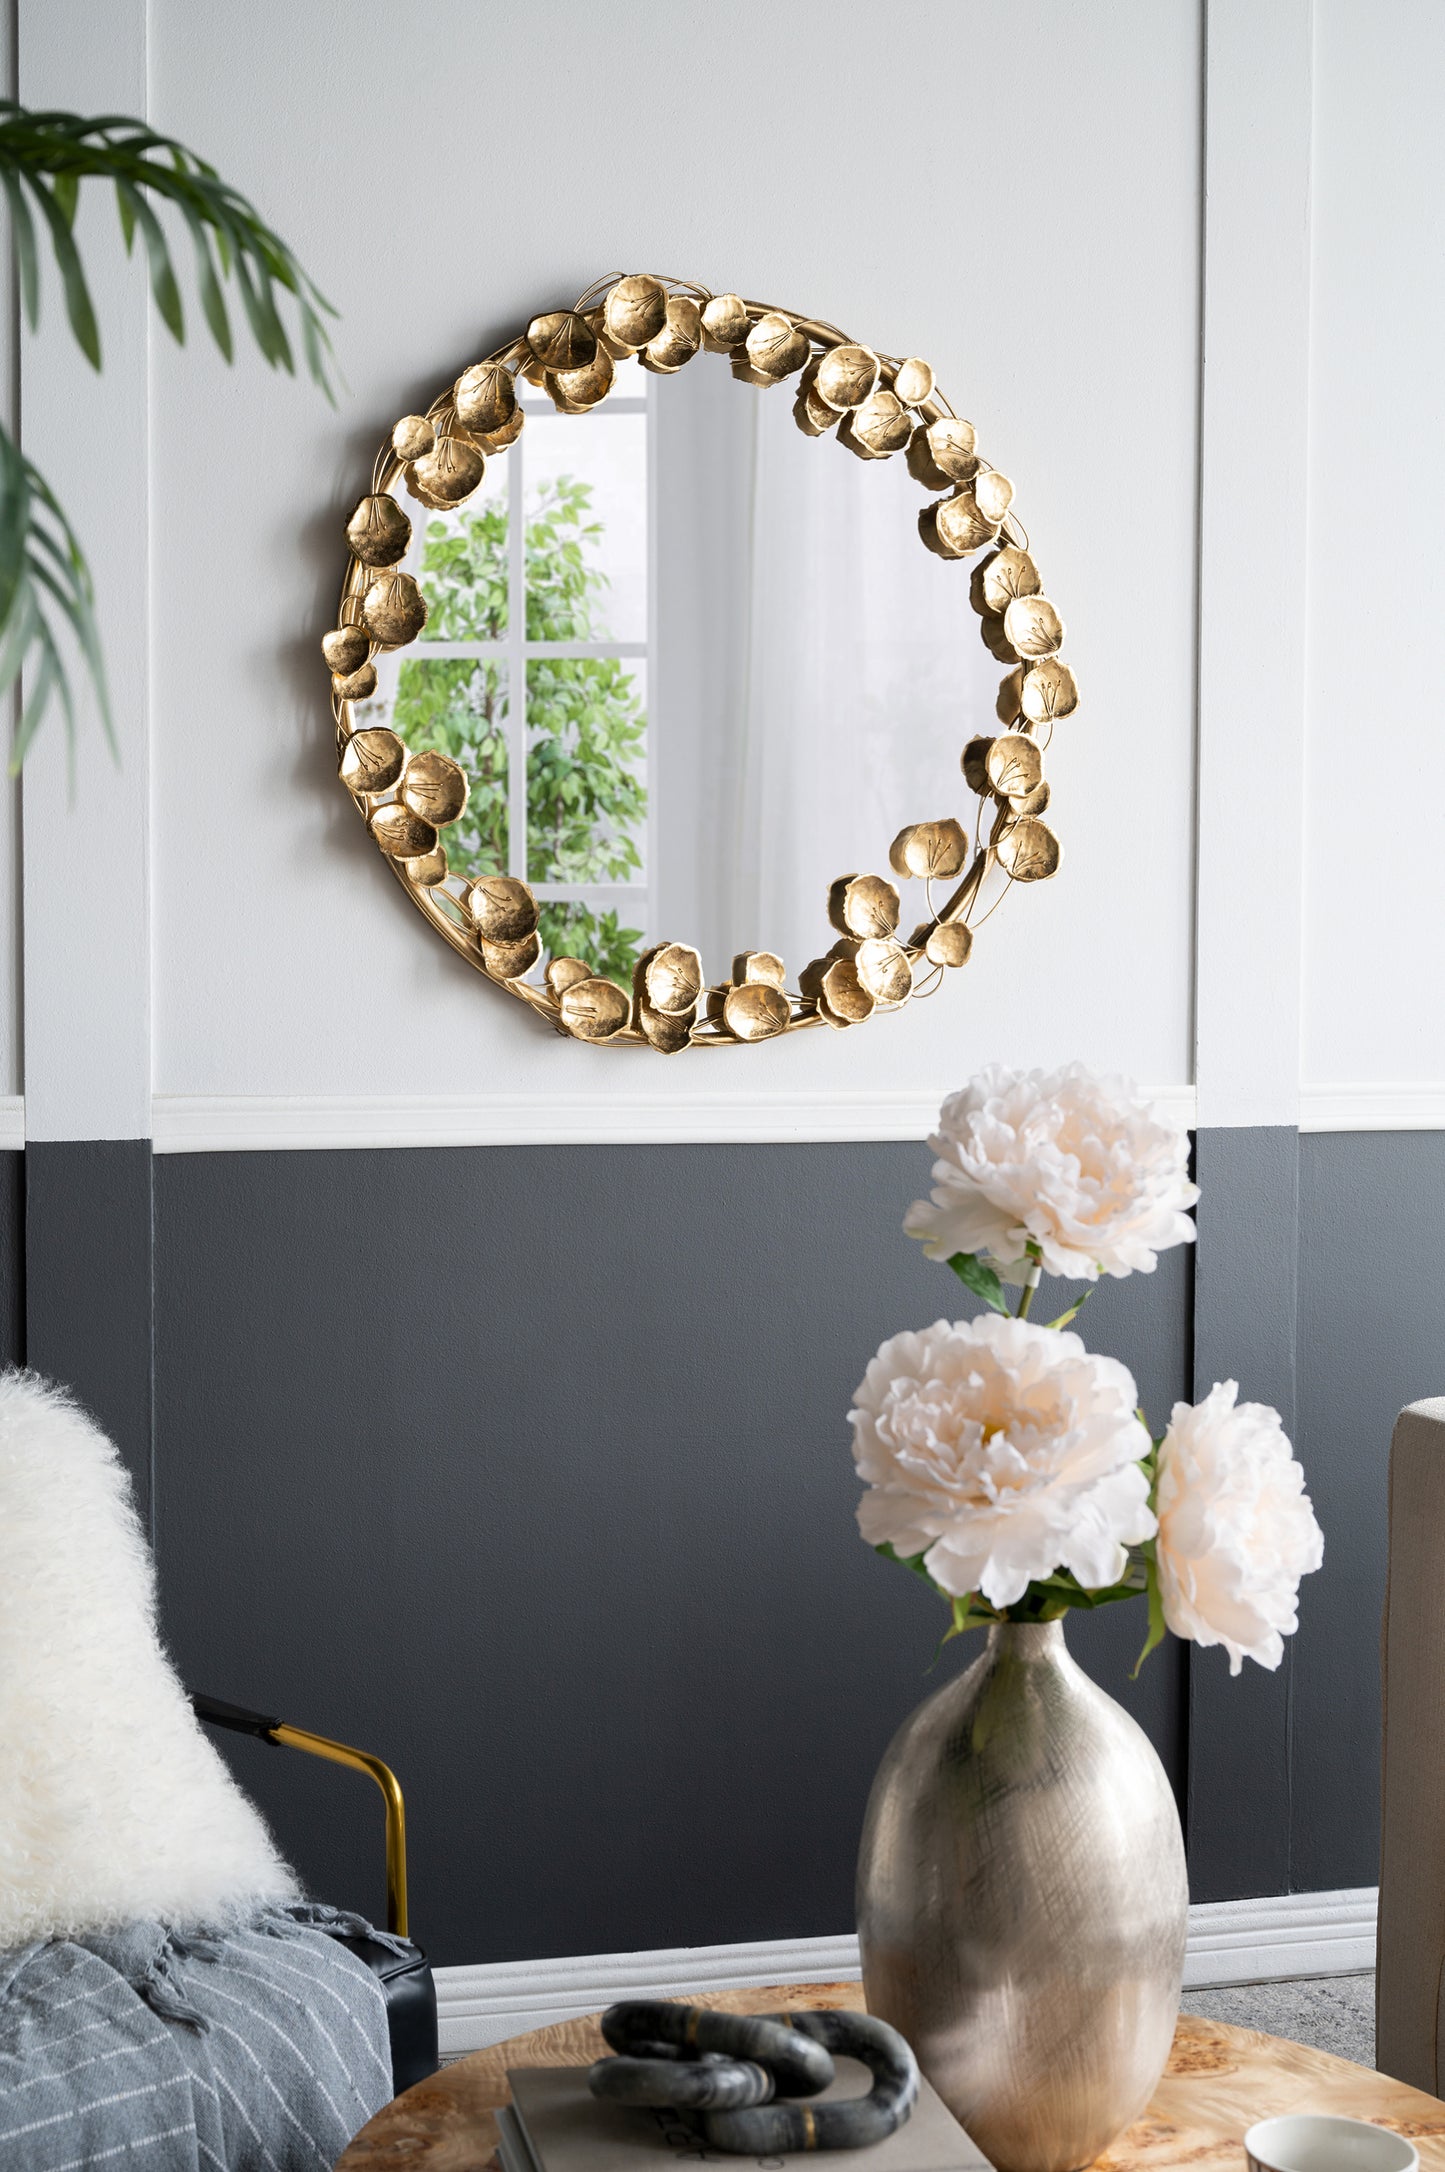 35" Round Metal Wall Mirror with Golden Leaf Accents